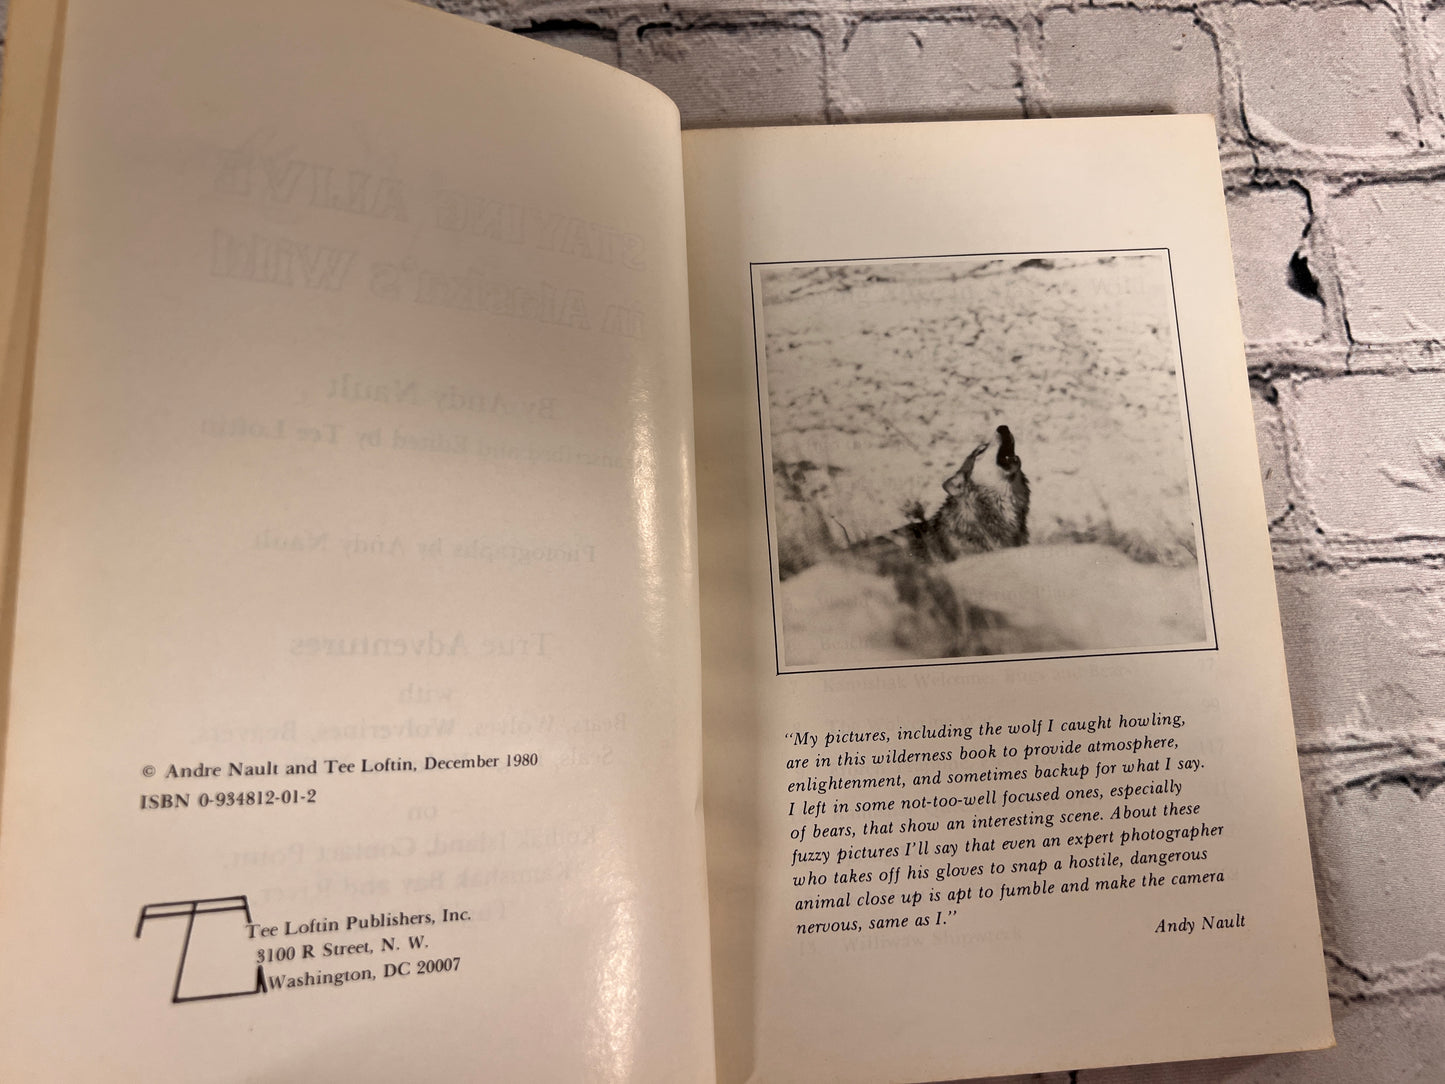 Staying Alive in Alaska's Wild by Andy Nault True Adventures [1980 · SIGNED]